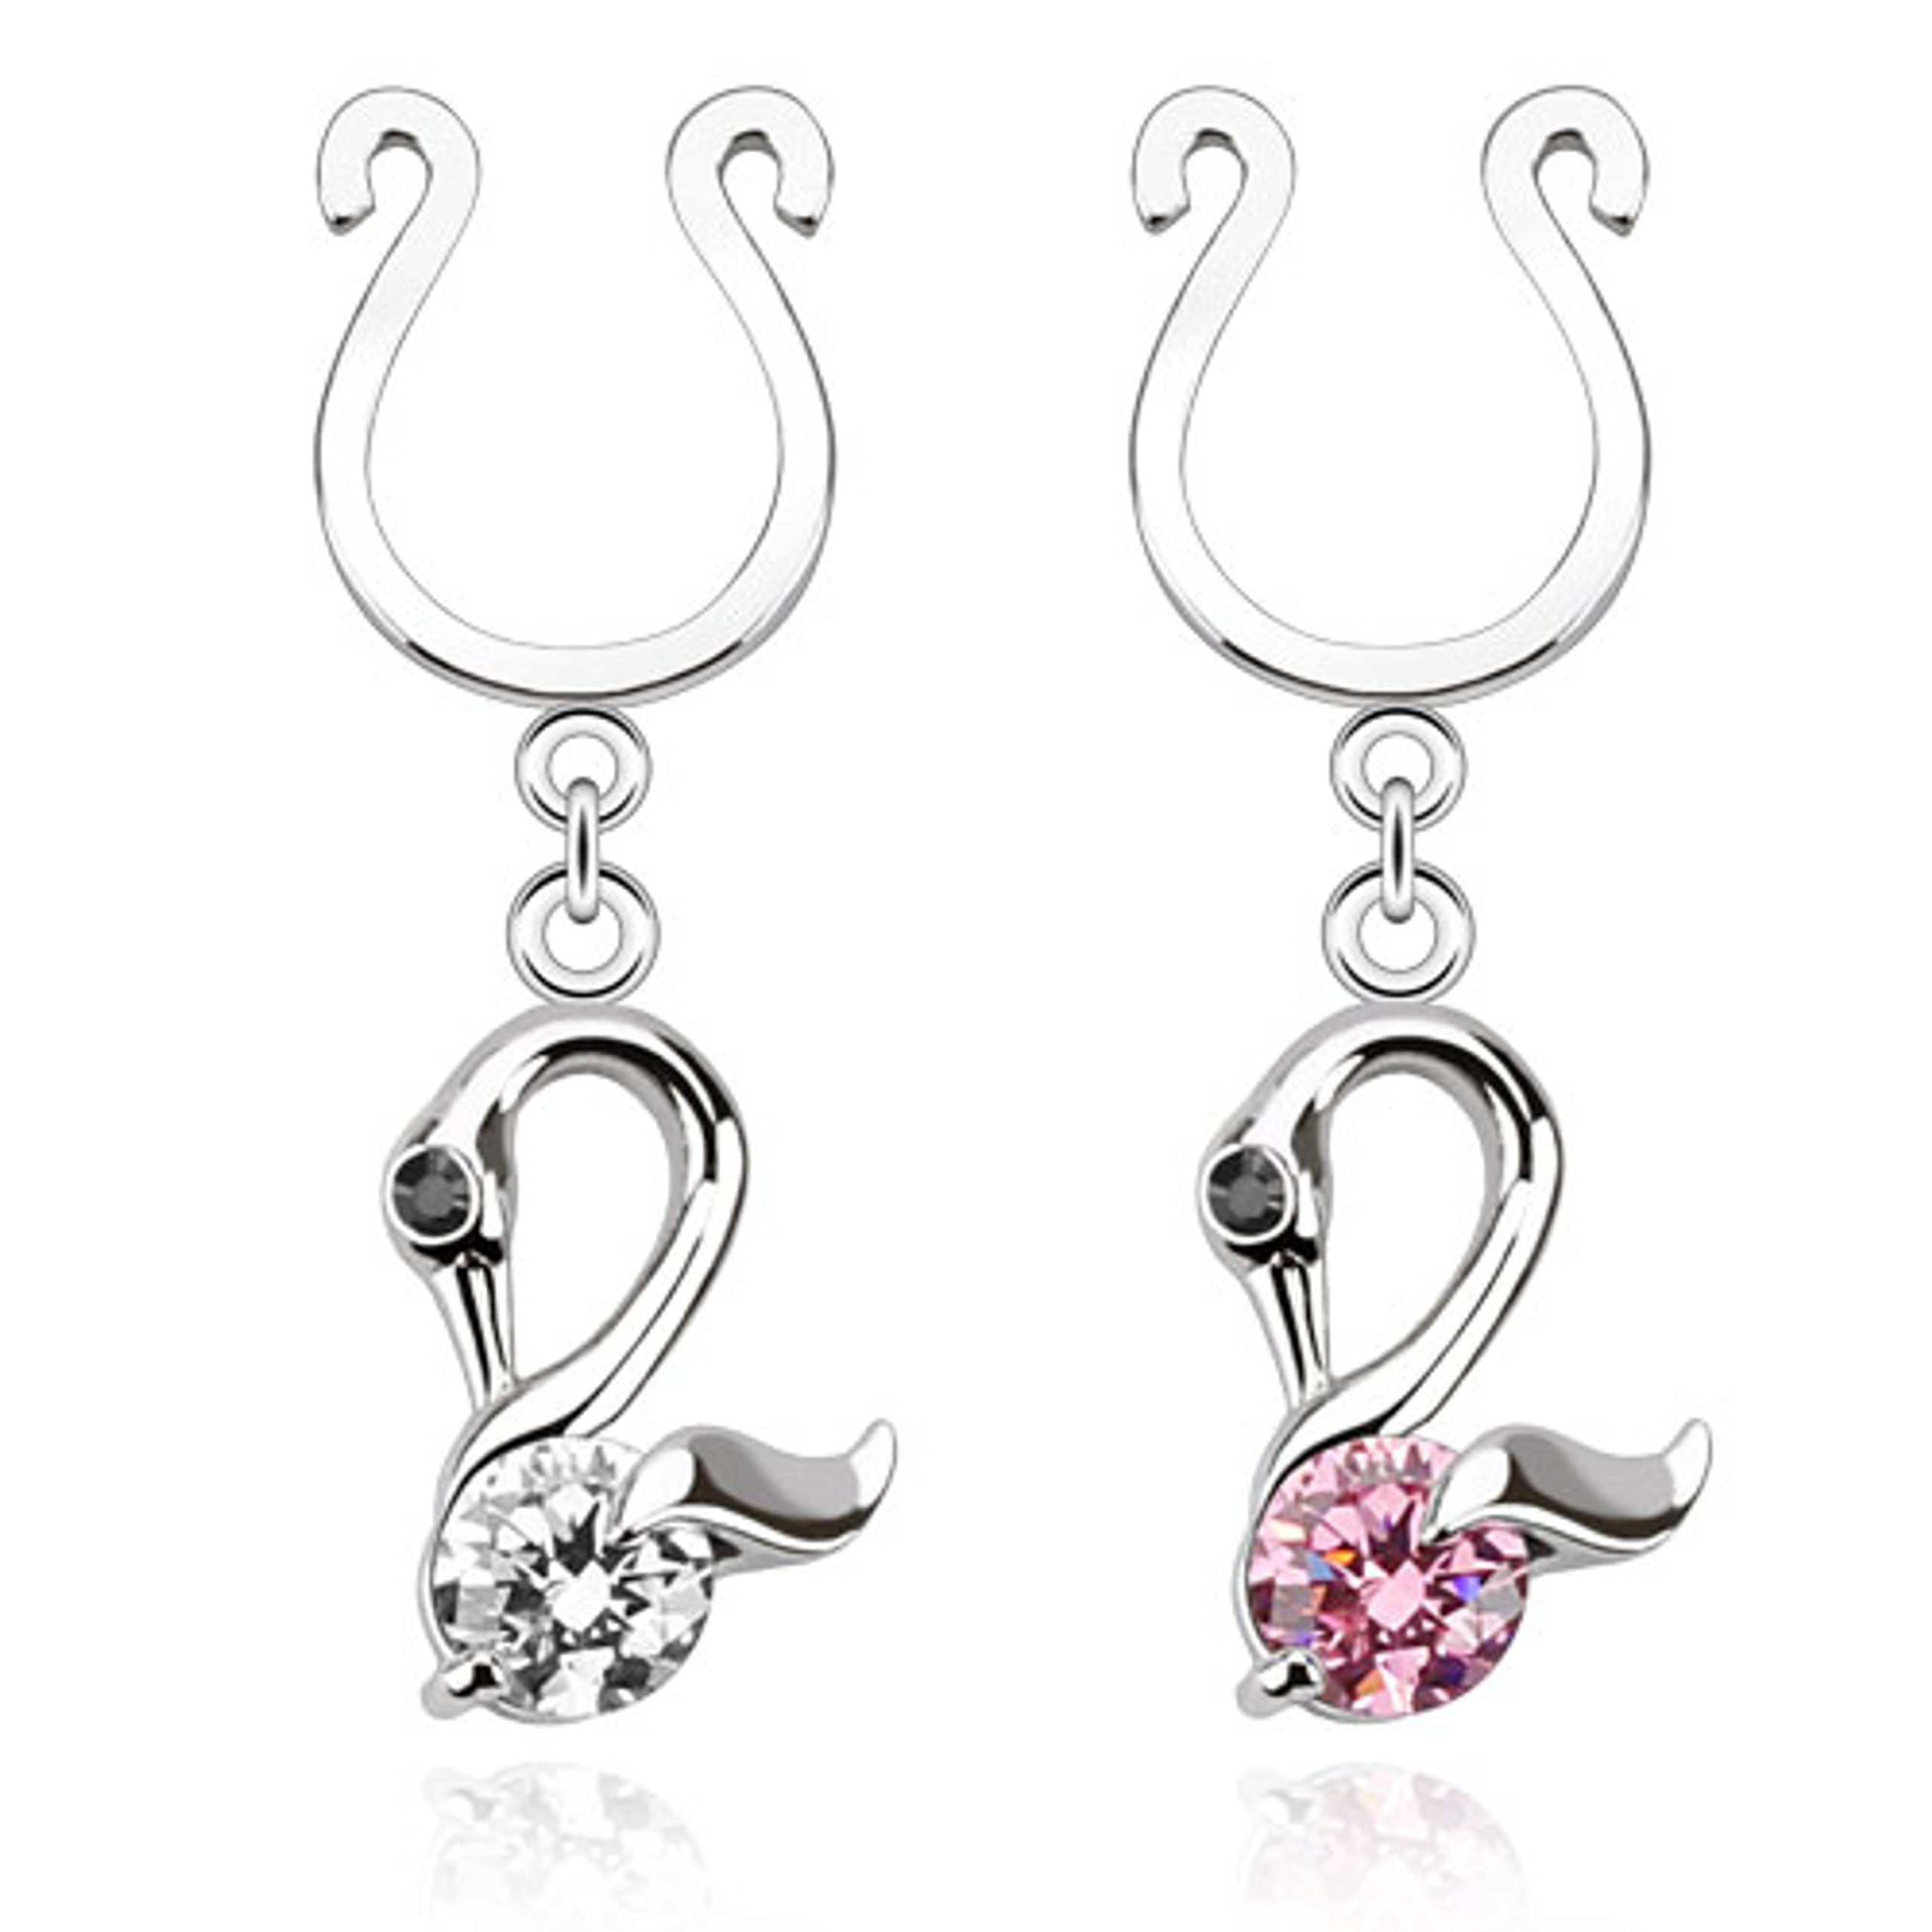 Nipple Clips, Non Piercing Nipple Clips Jewelry from BodyJewelry.com